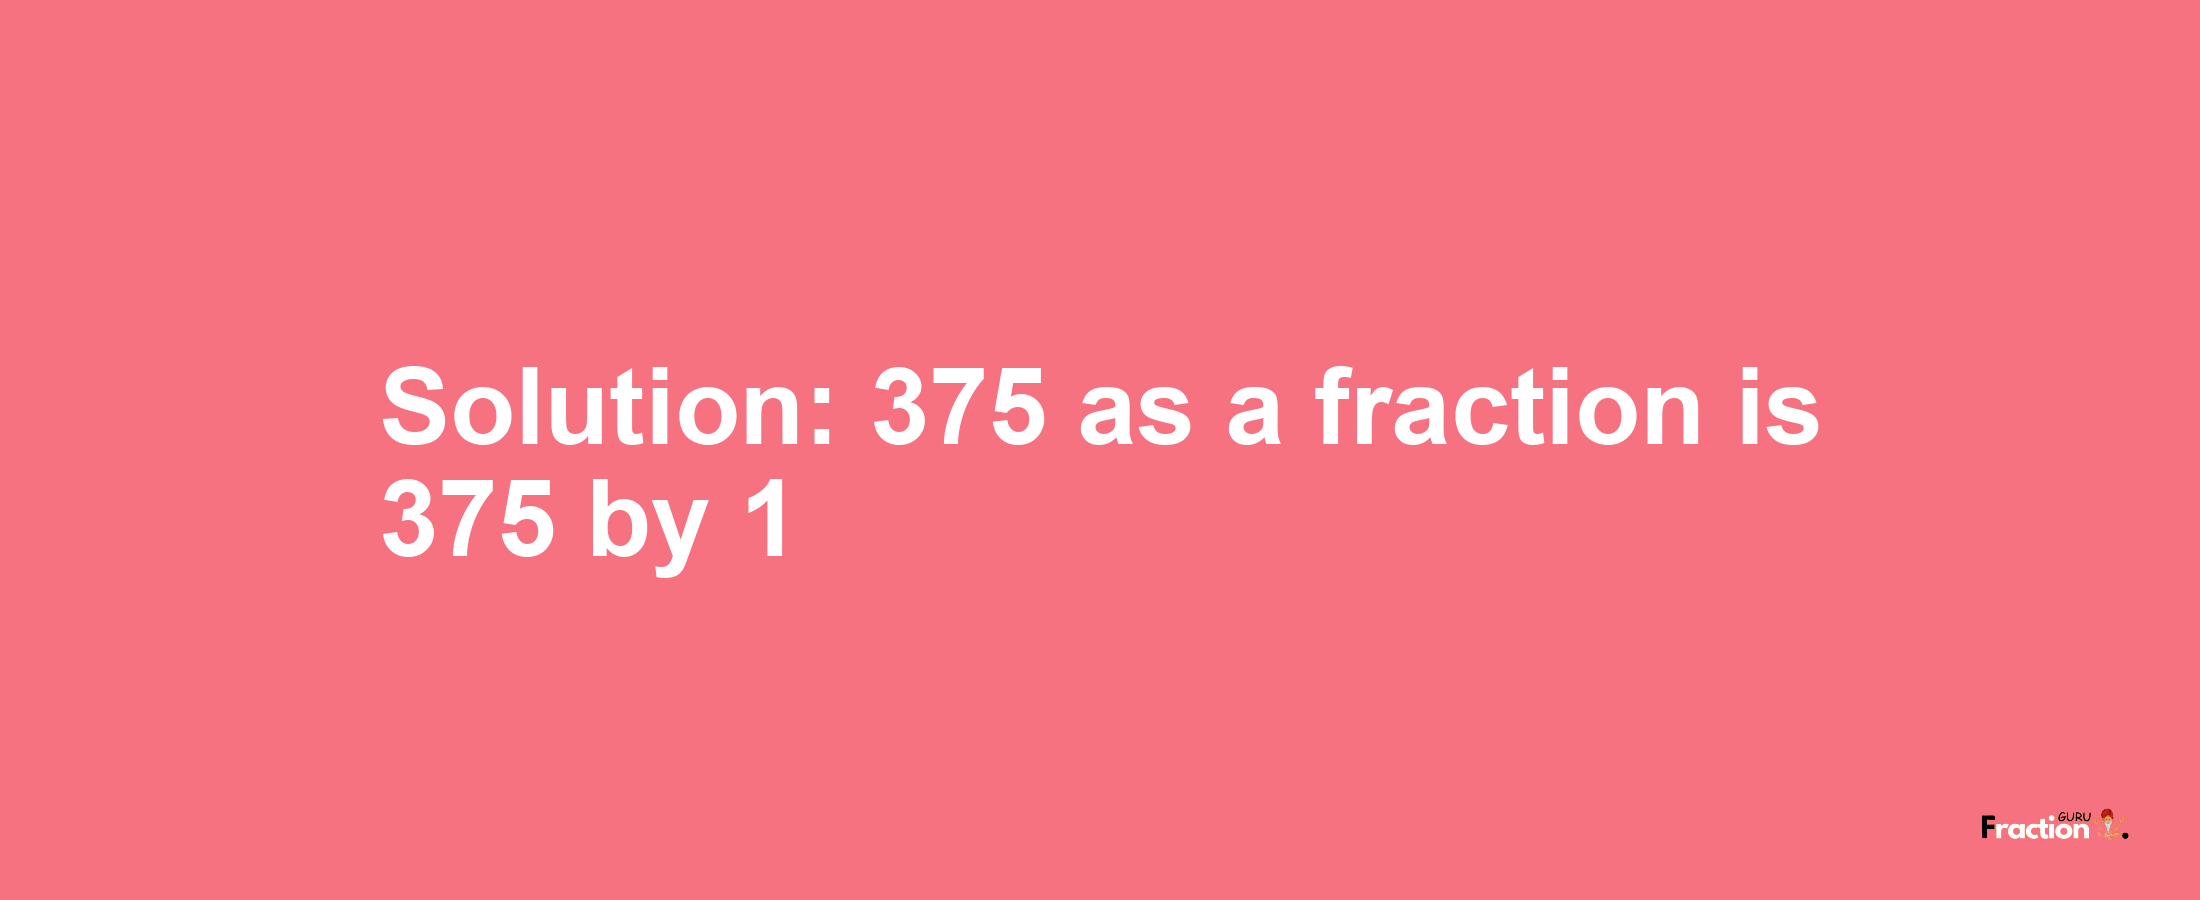 Solution:375 as a fraction is 375/1